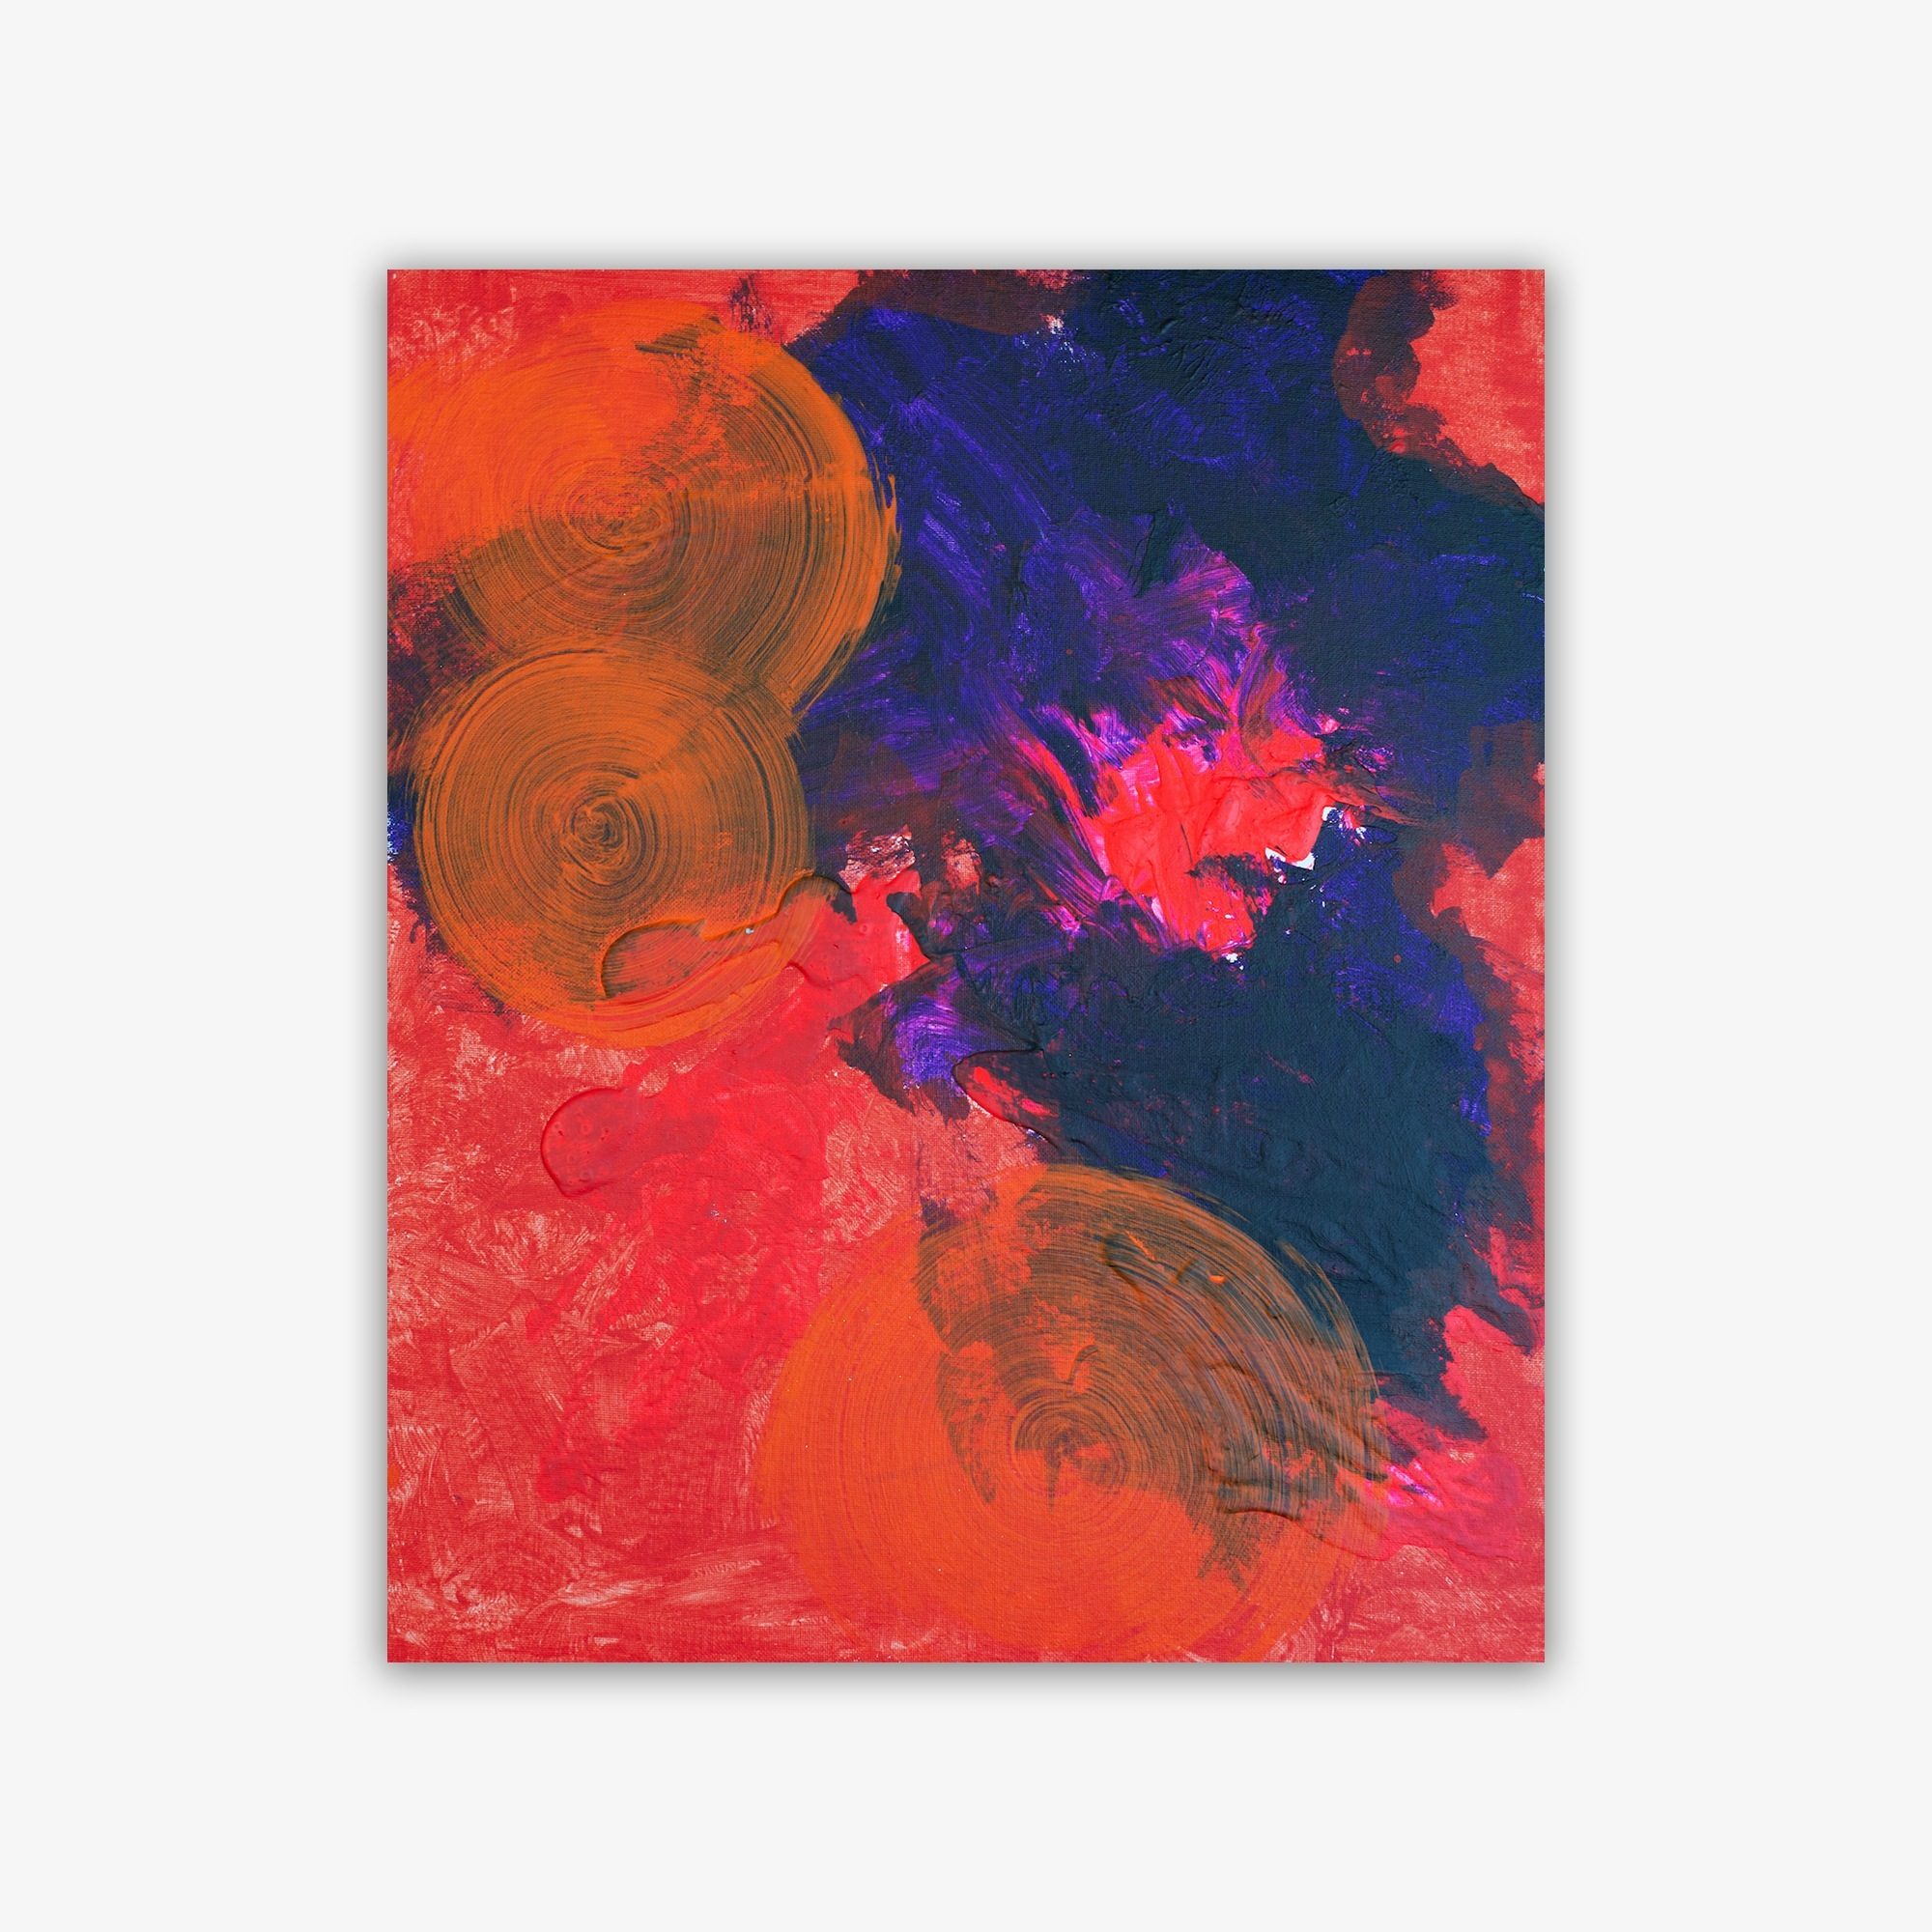 Abstract painting by artist Amy Myers titled "No Solutions Yet" featuring an orange, blue, and red design.